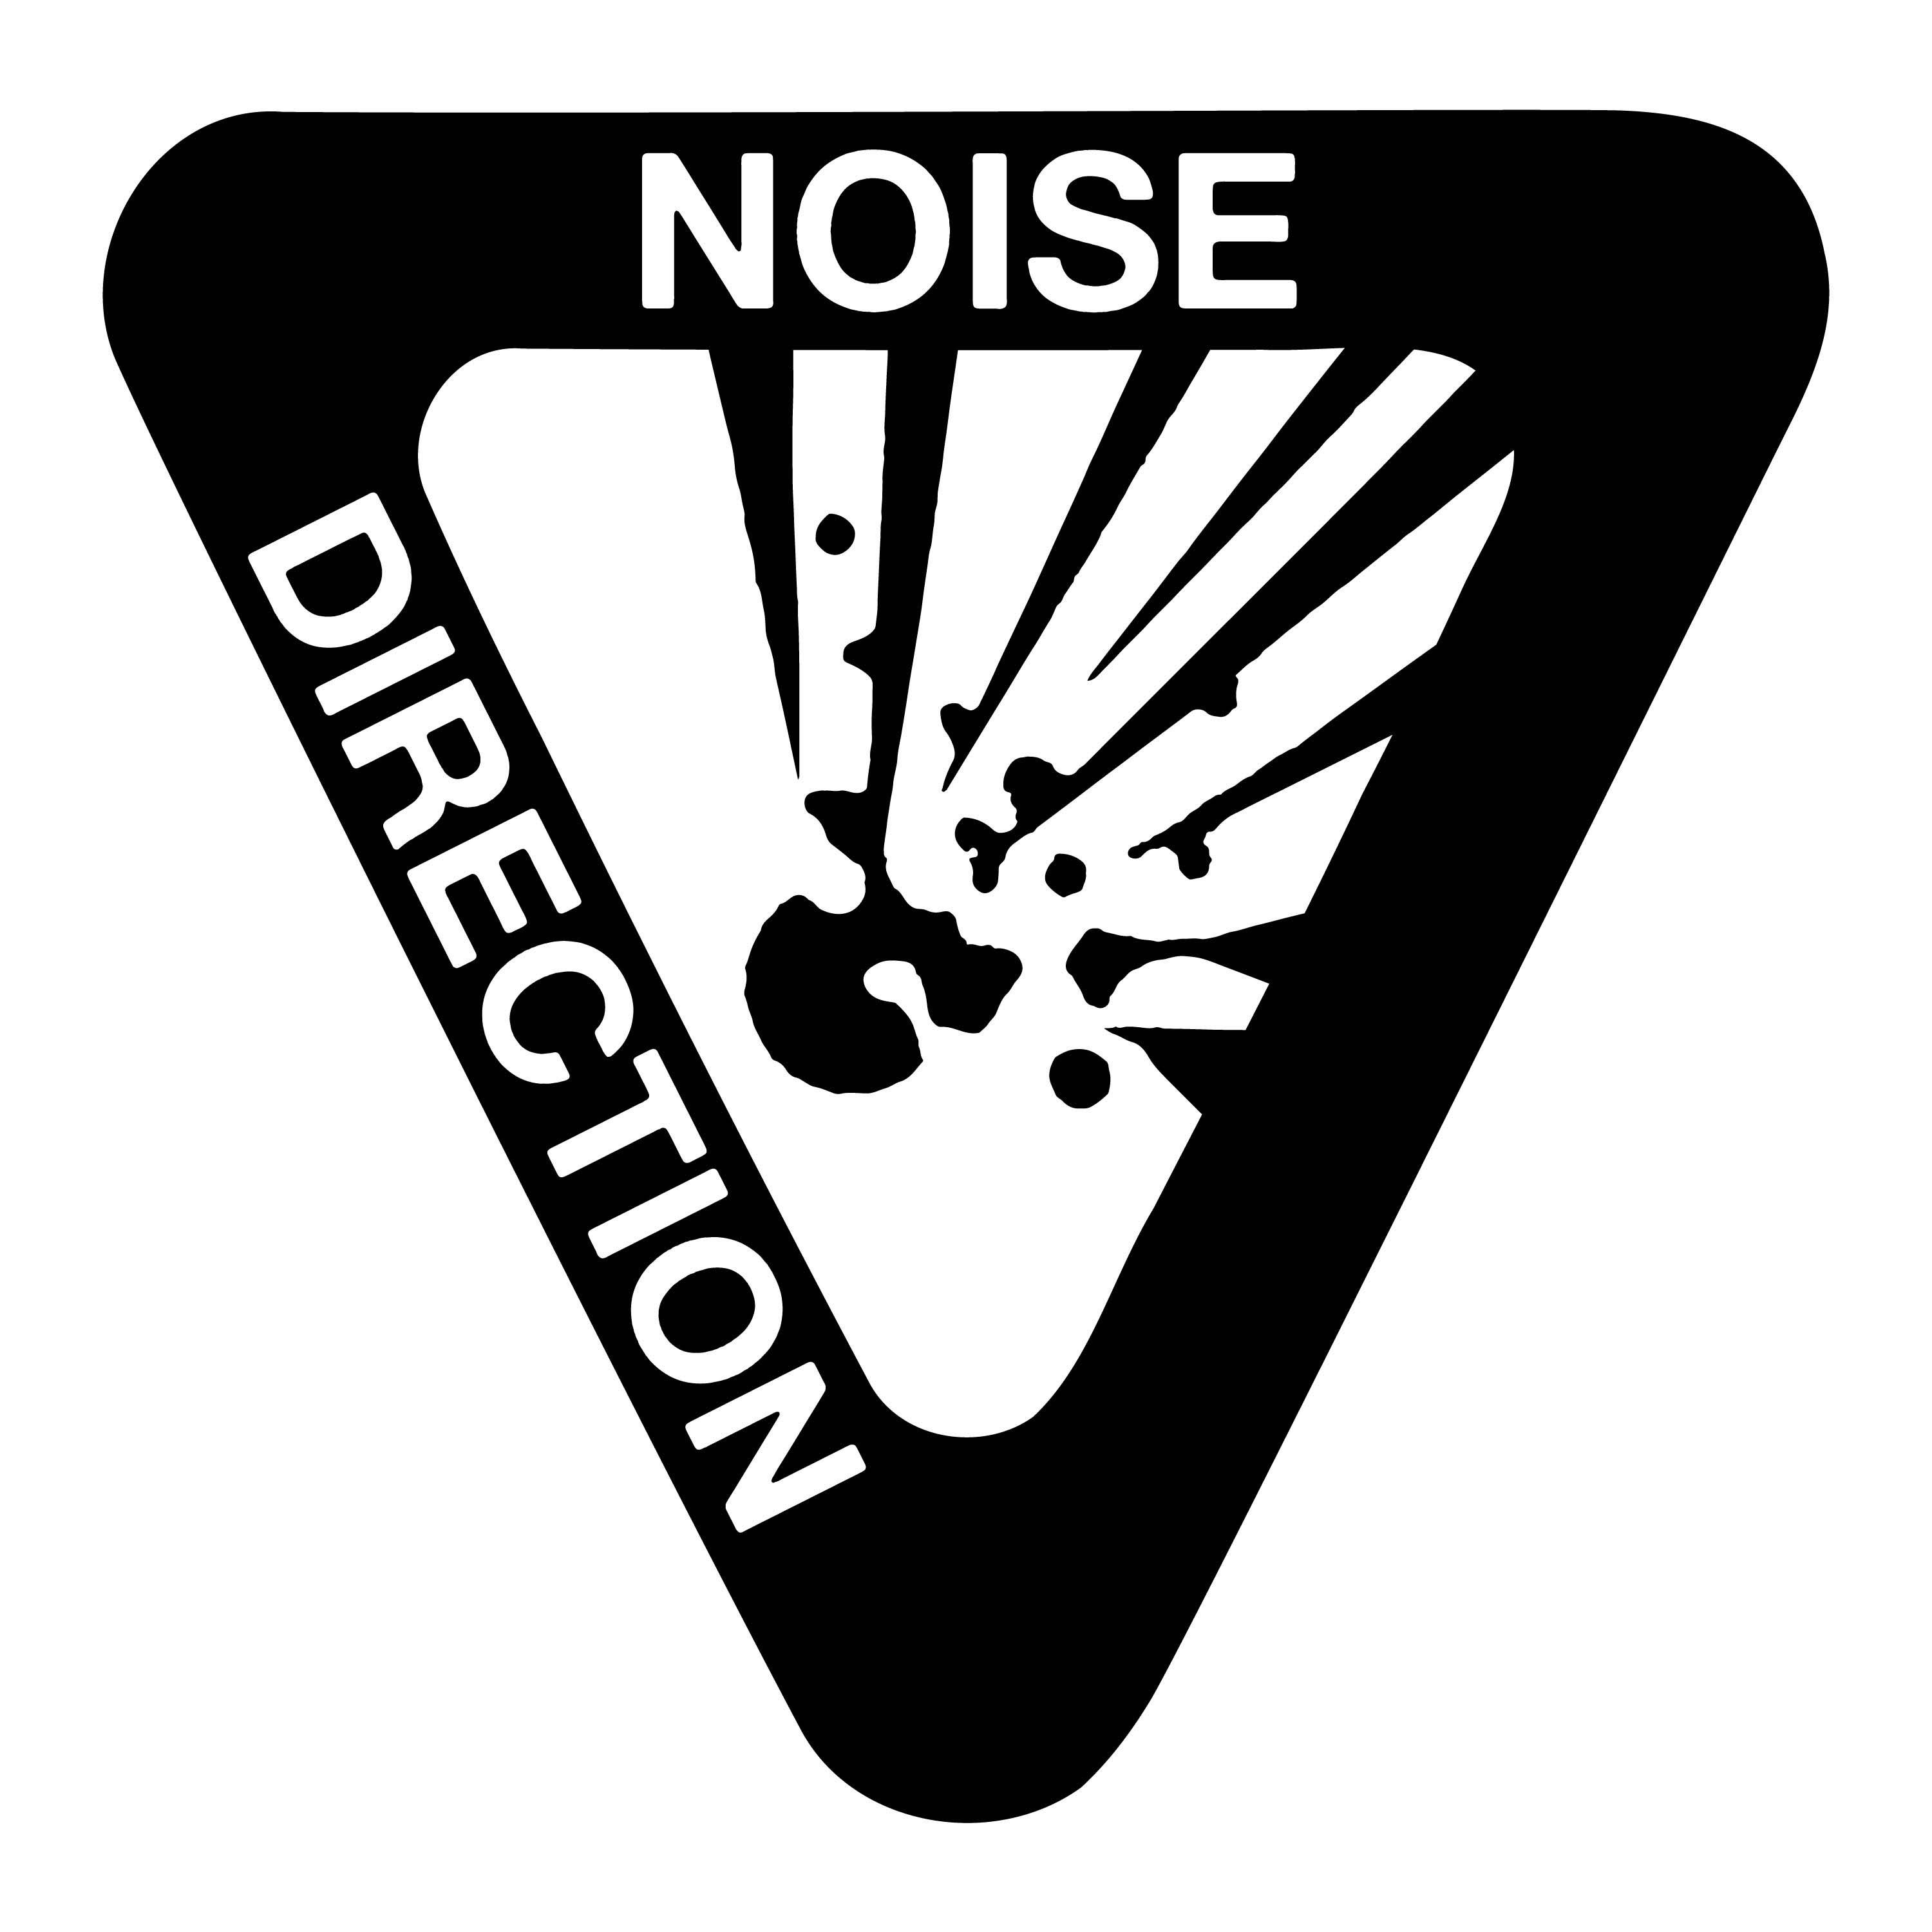 Noise Direction #11: What Is A Label Looking For Anyway?